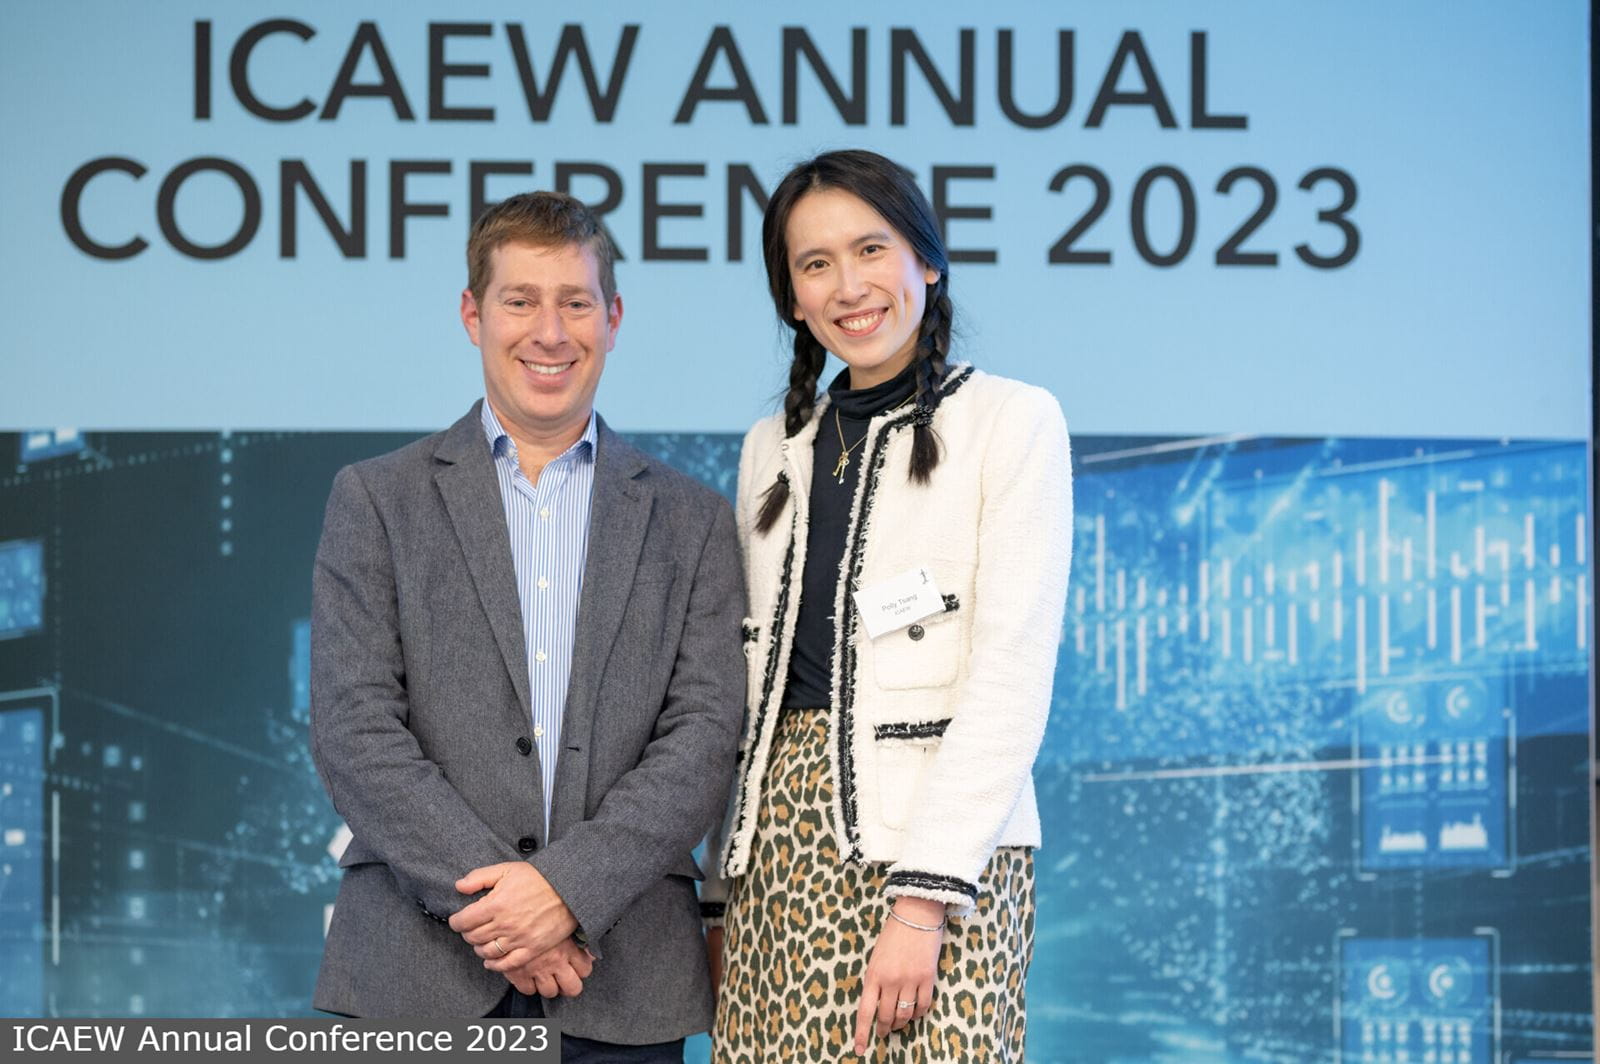 ICAEW Annual Conference 2023